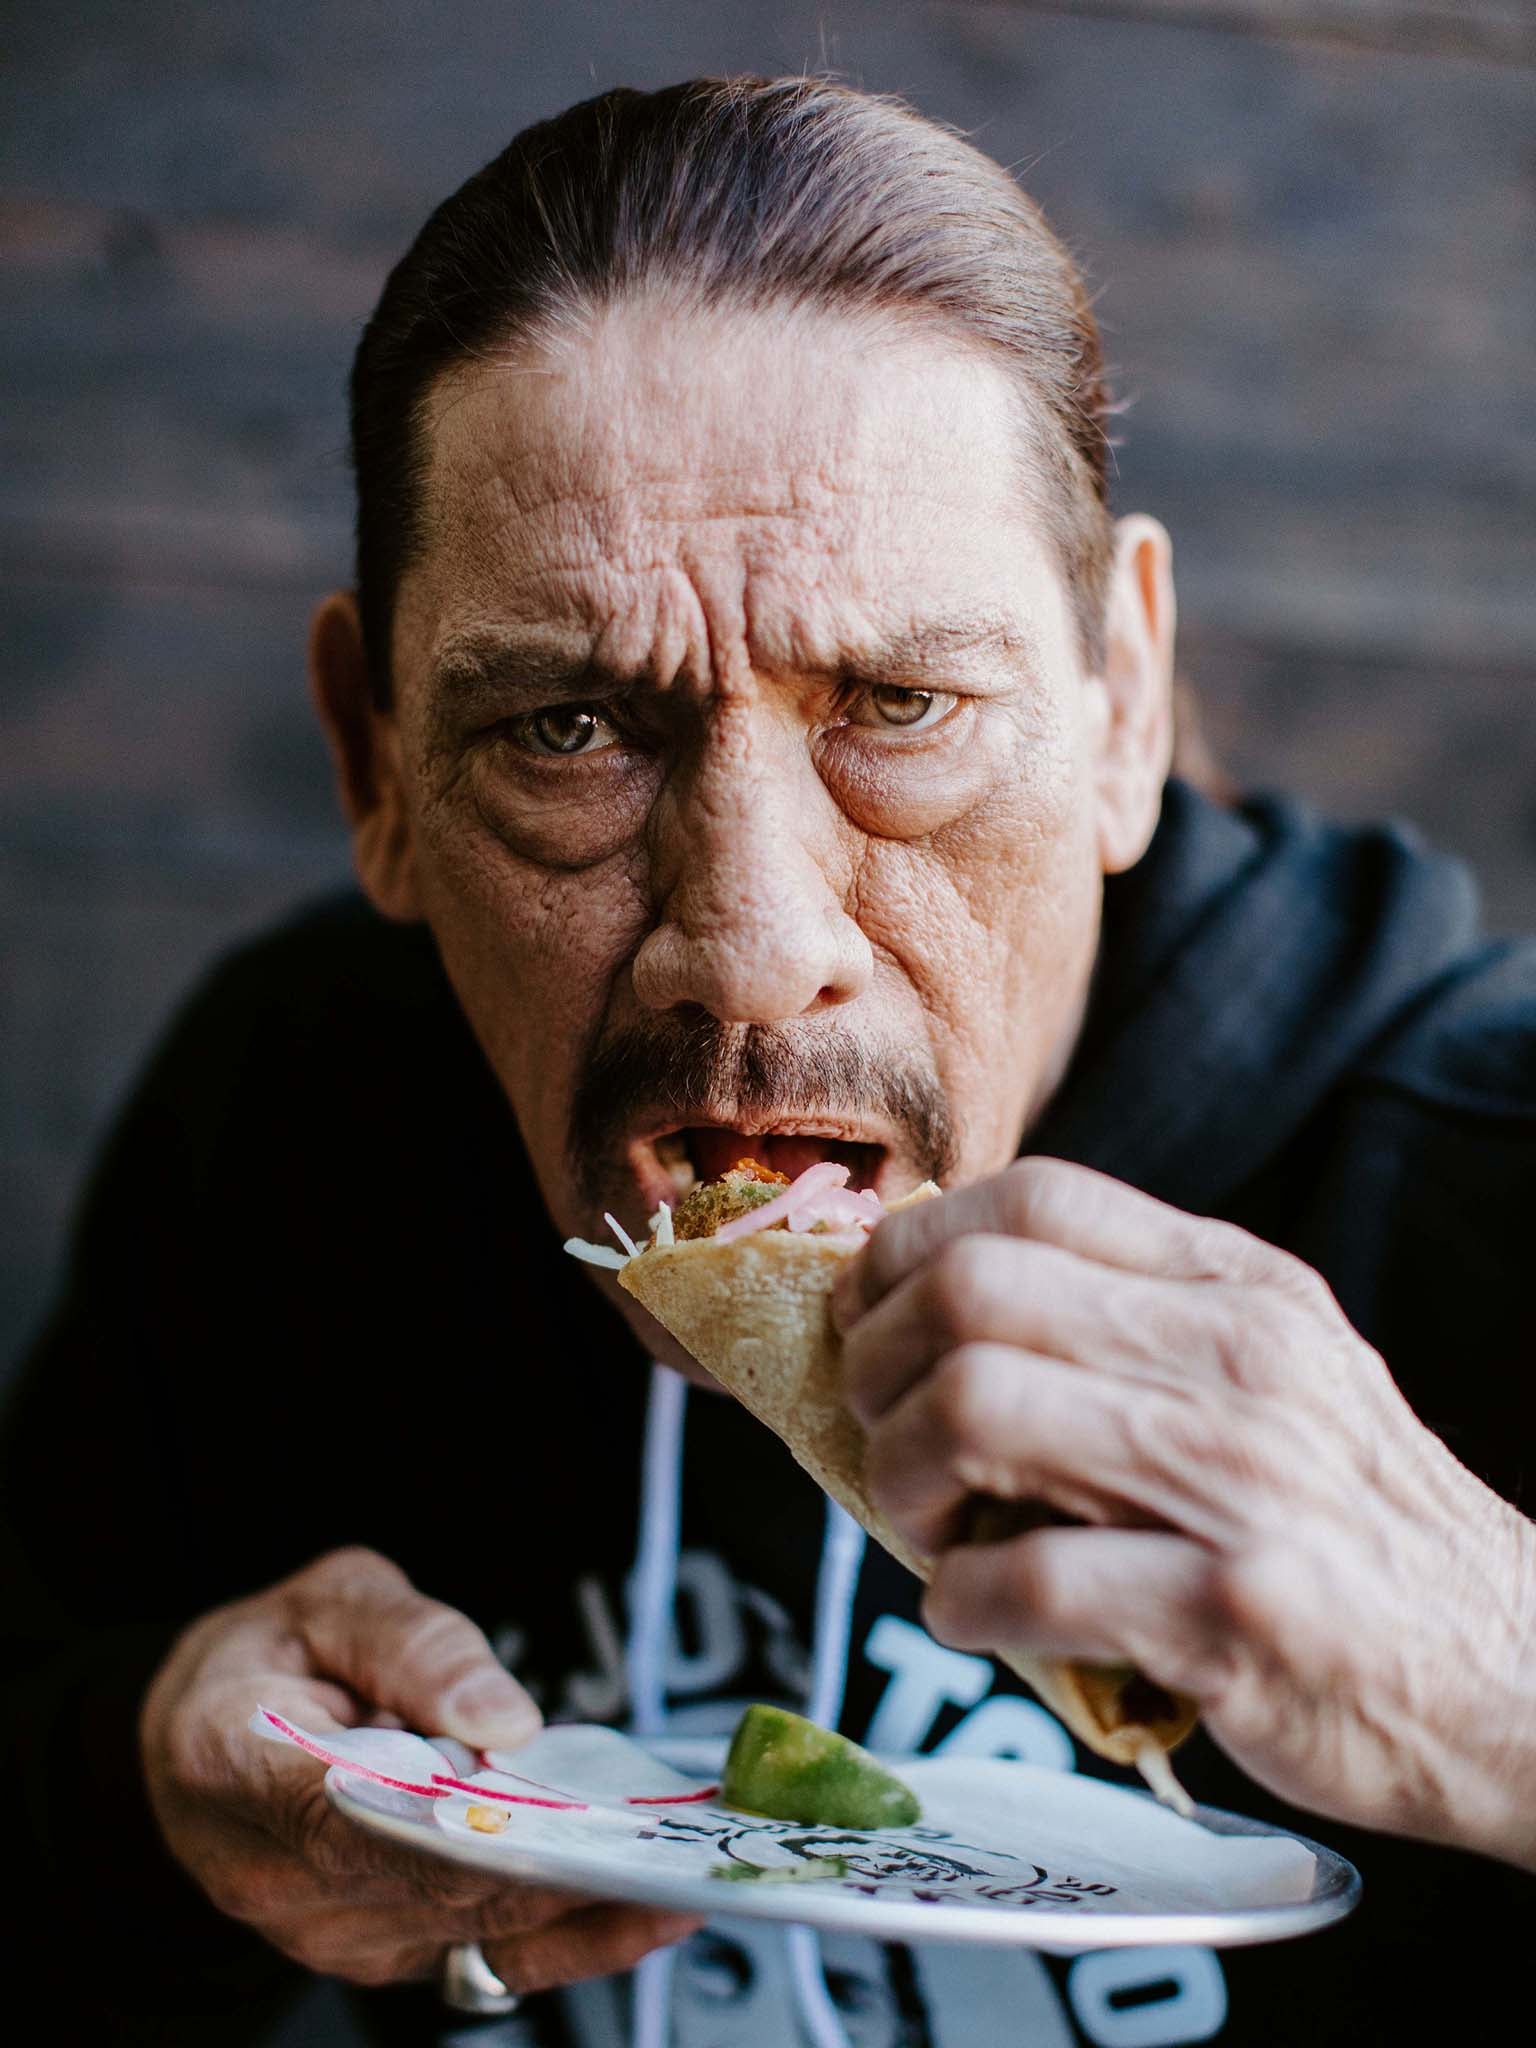 Trejo is gluten-free and teetotal